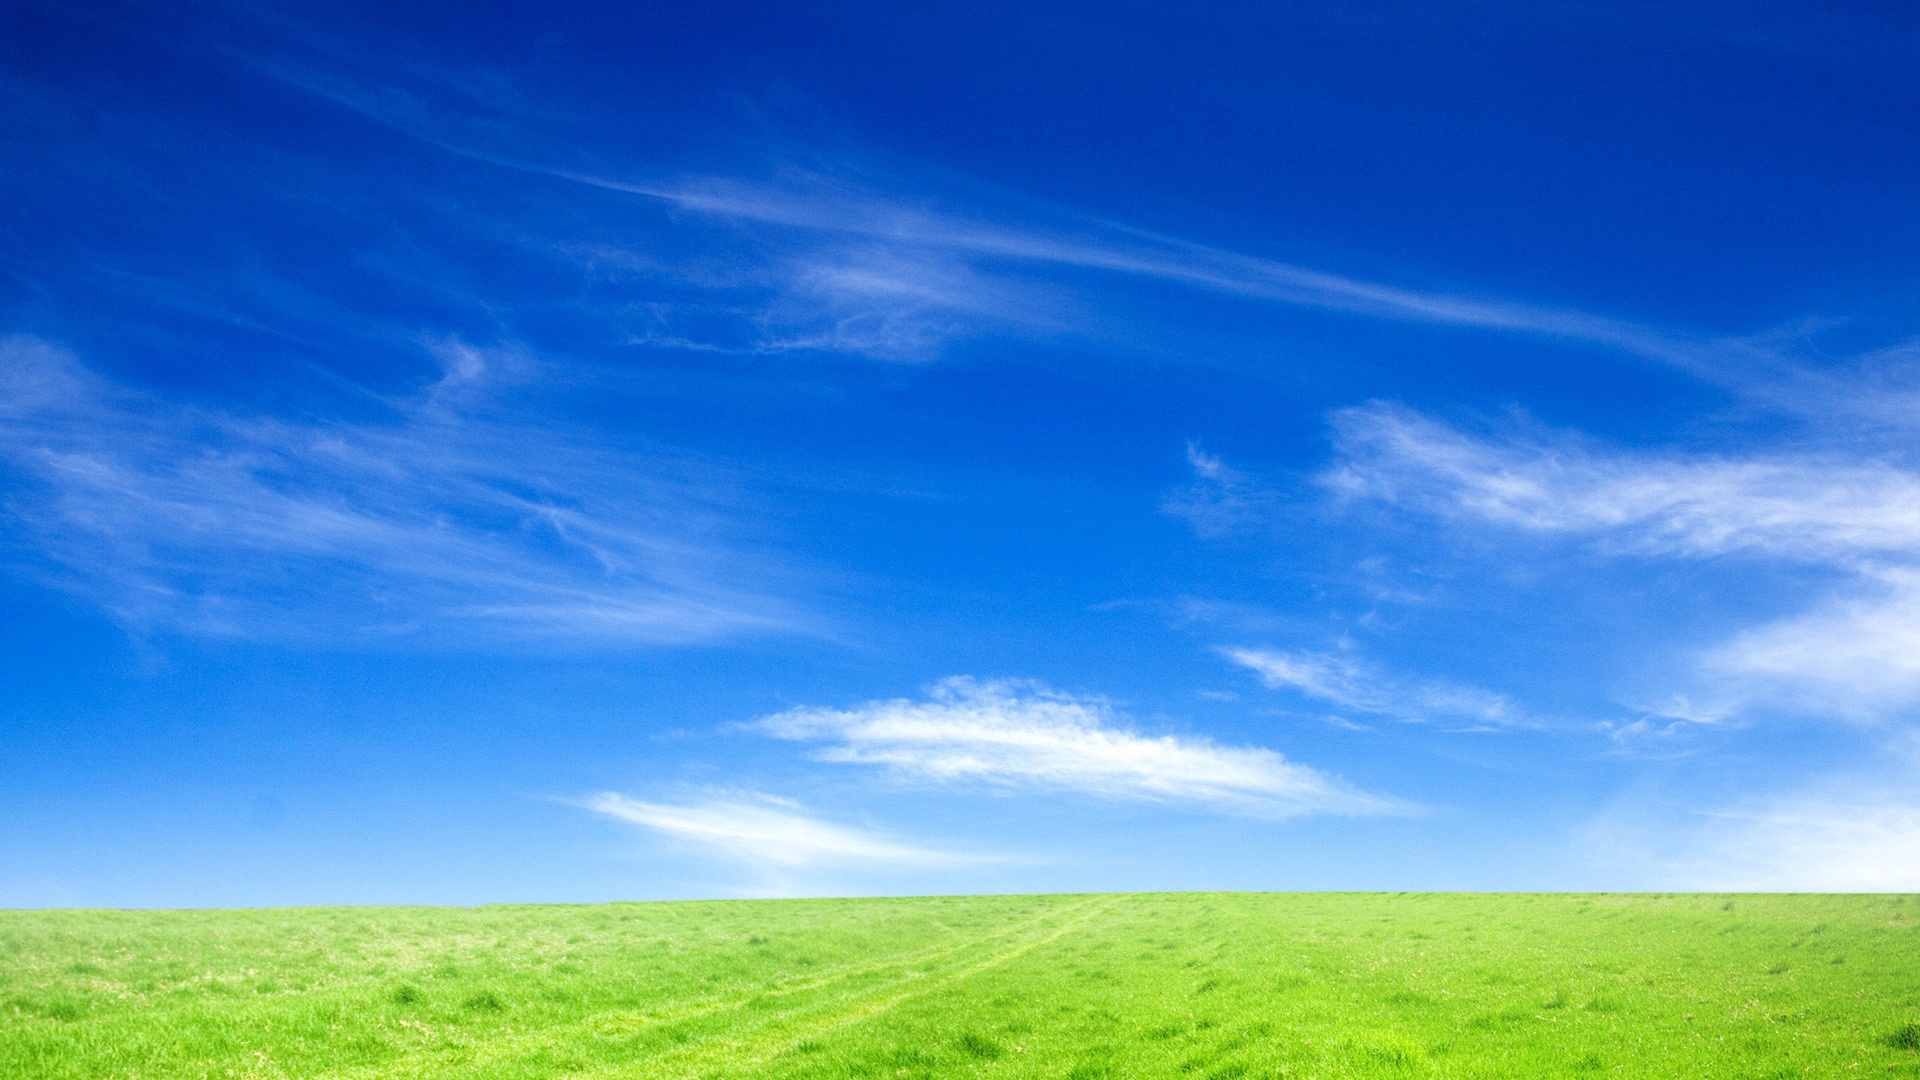 Blue Sky and Green Grass Wallpapers in jpg format for free download